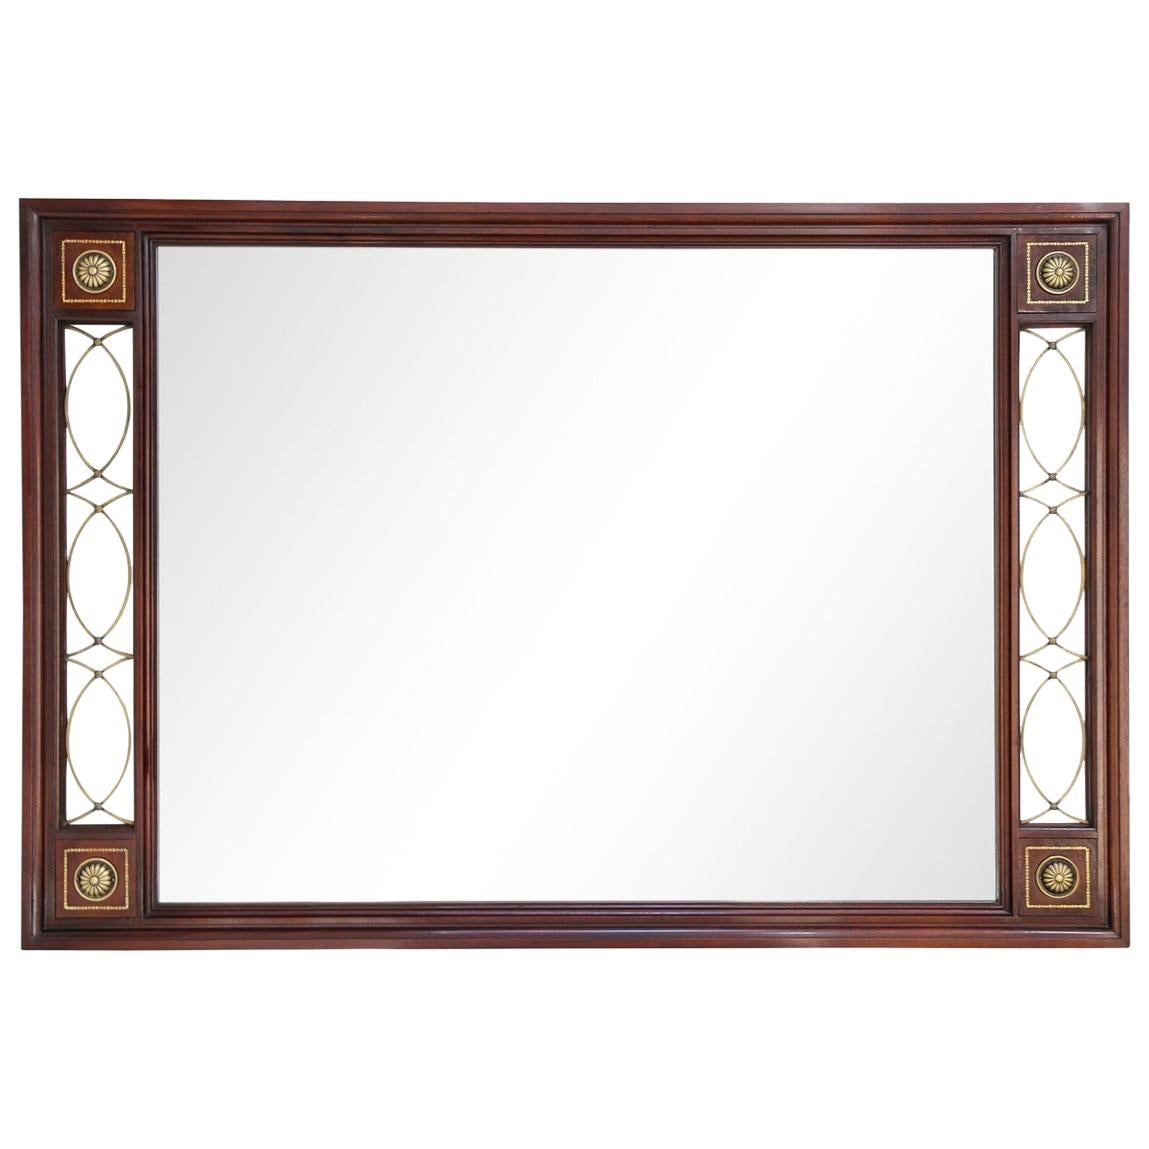 Large Empire Mahogany Mirror with Brass and Leather Accents